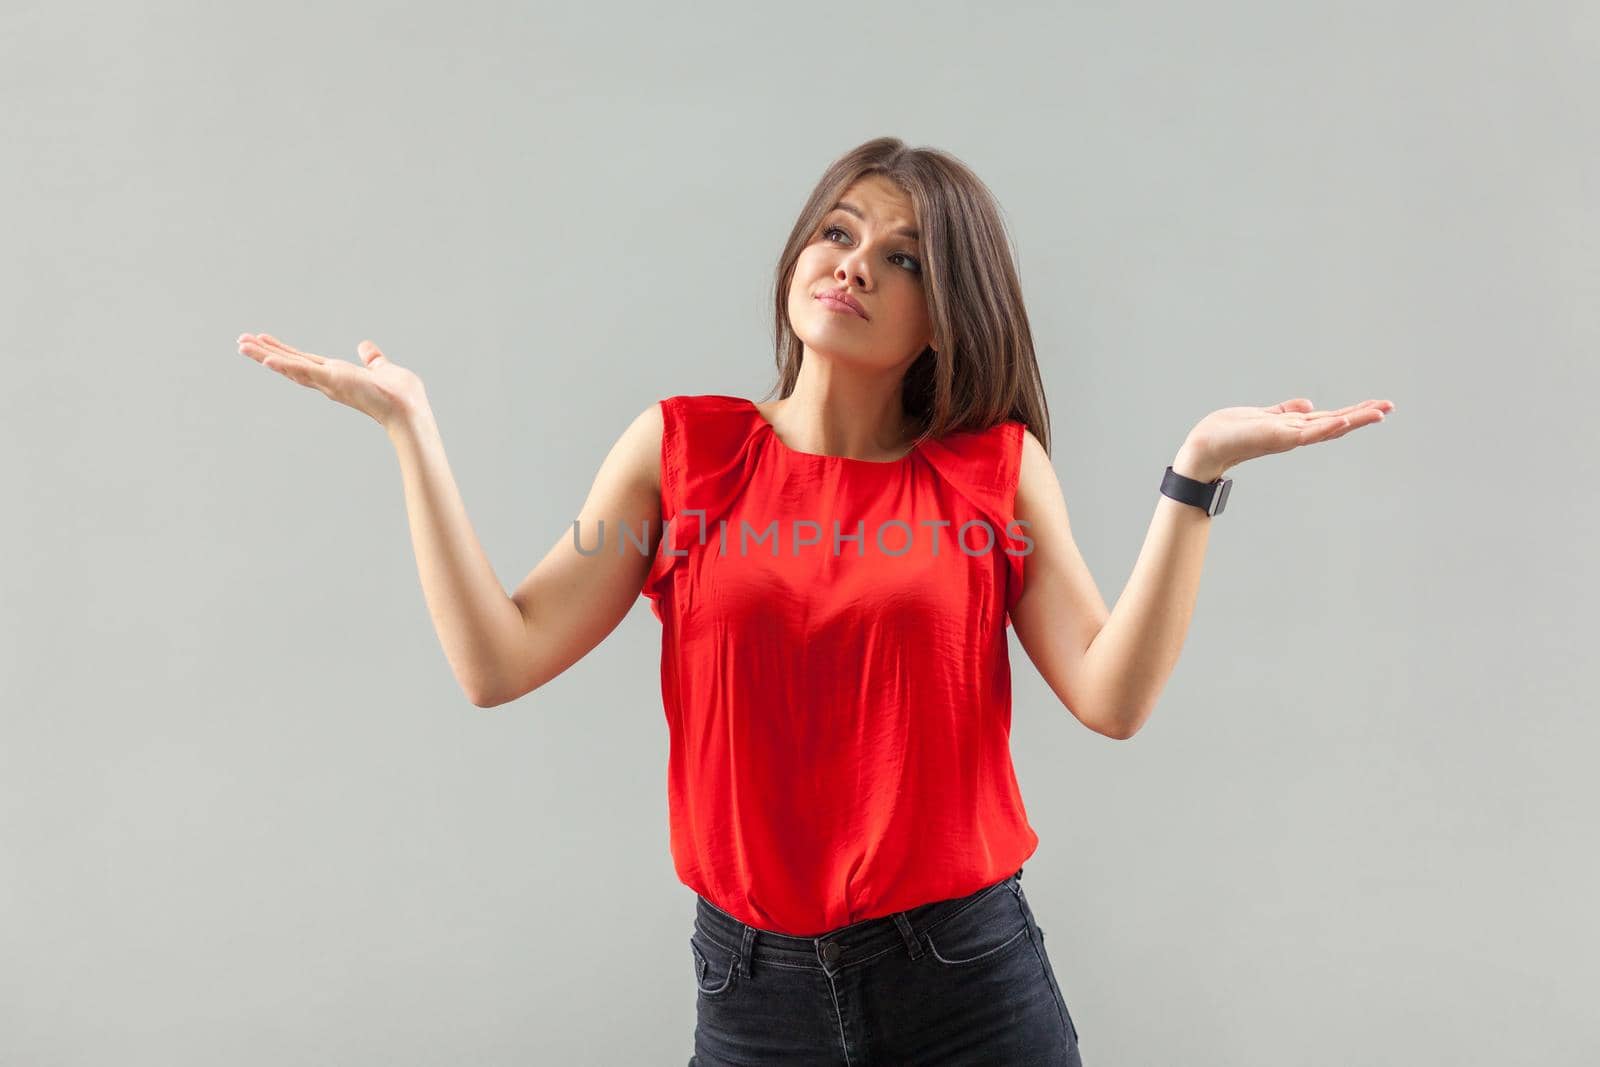 Portrait of puzzled beautiful brunette young woman in red shirt standing with raised arms, looking away thinking and confused. indoor, studio shot, isolated on gray background.